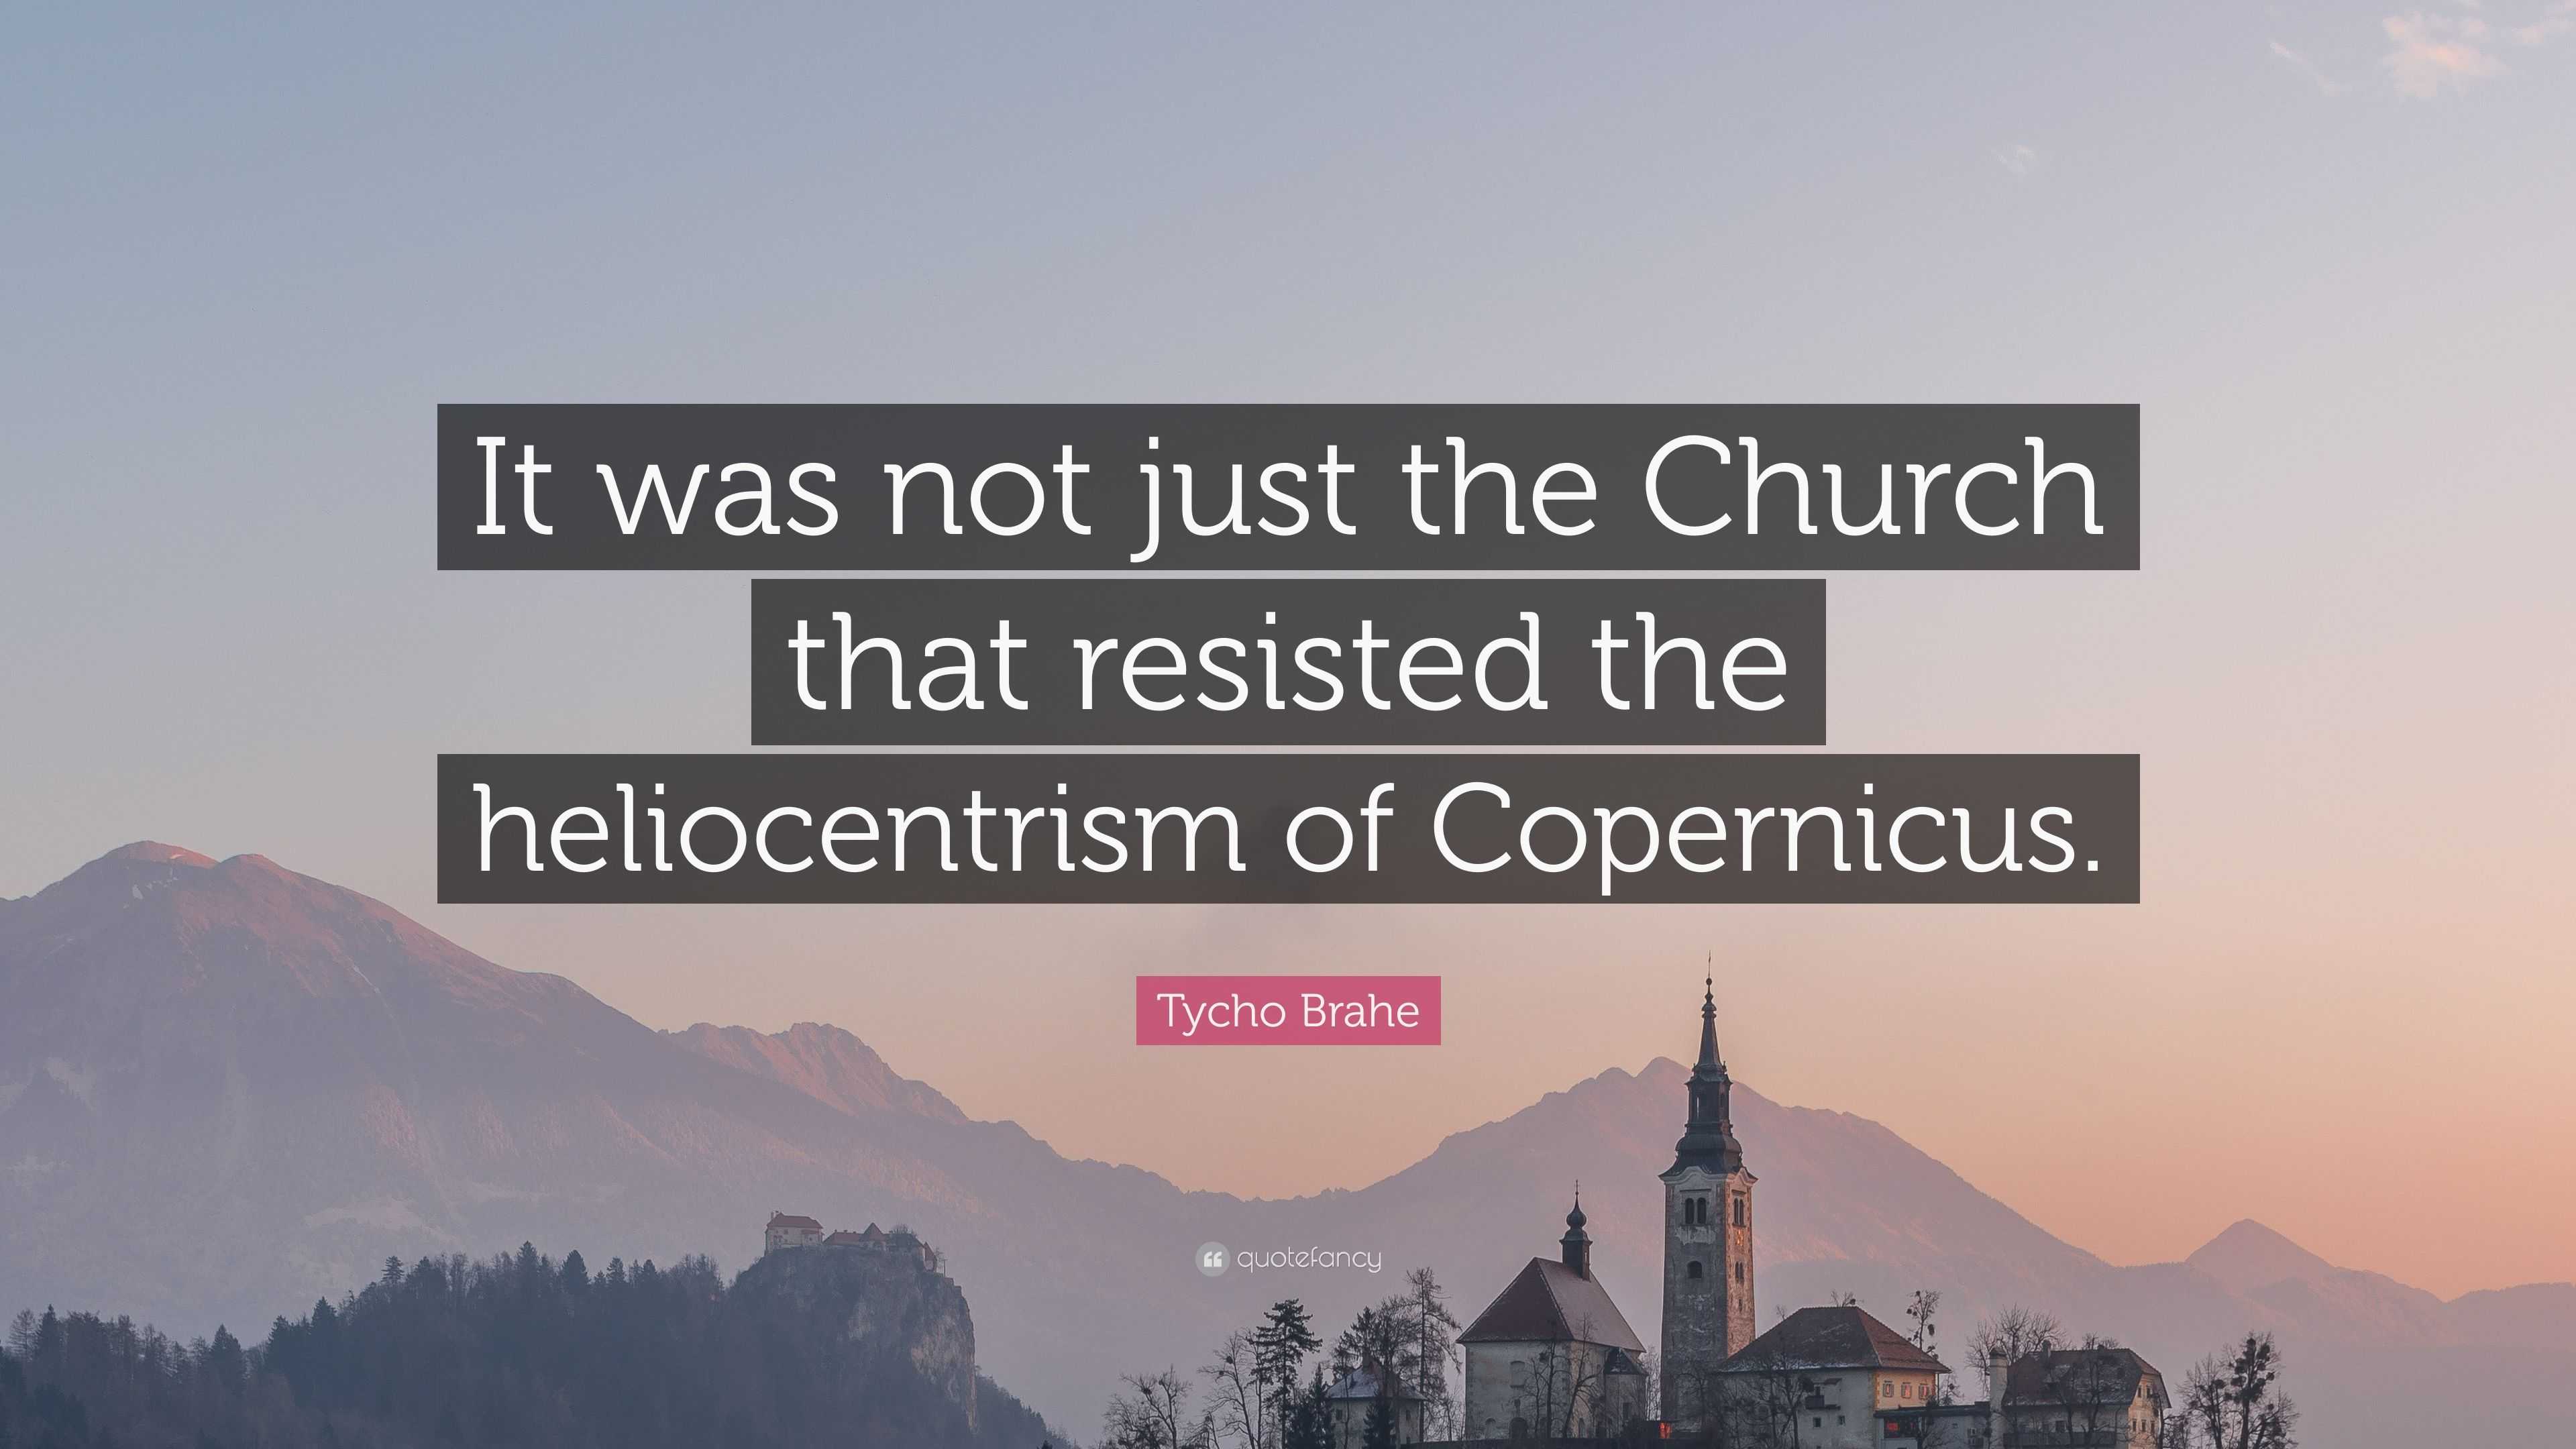 Tycho Brahe Quote: "It was not just the Church that resisted the heliocentrism of Copernicus ...